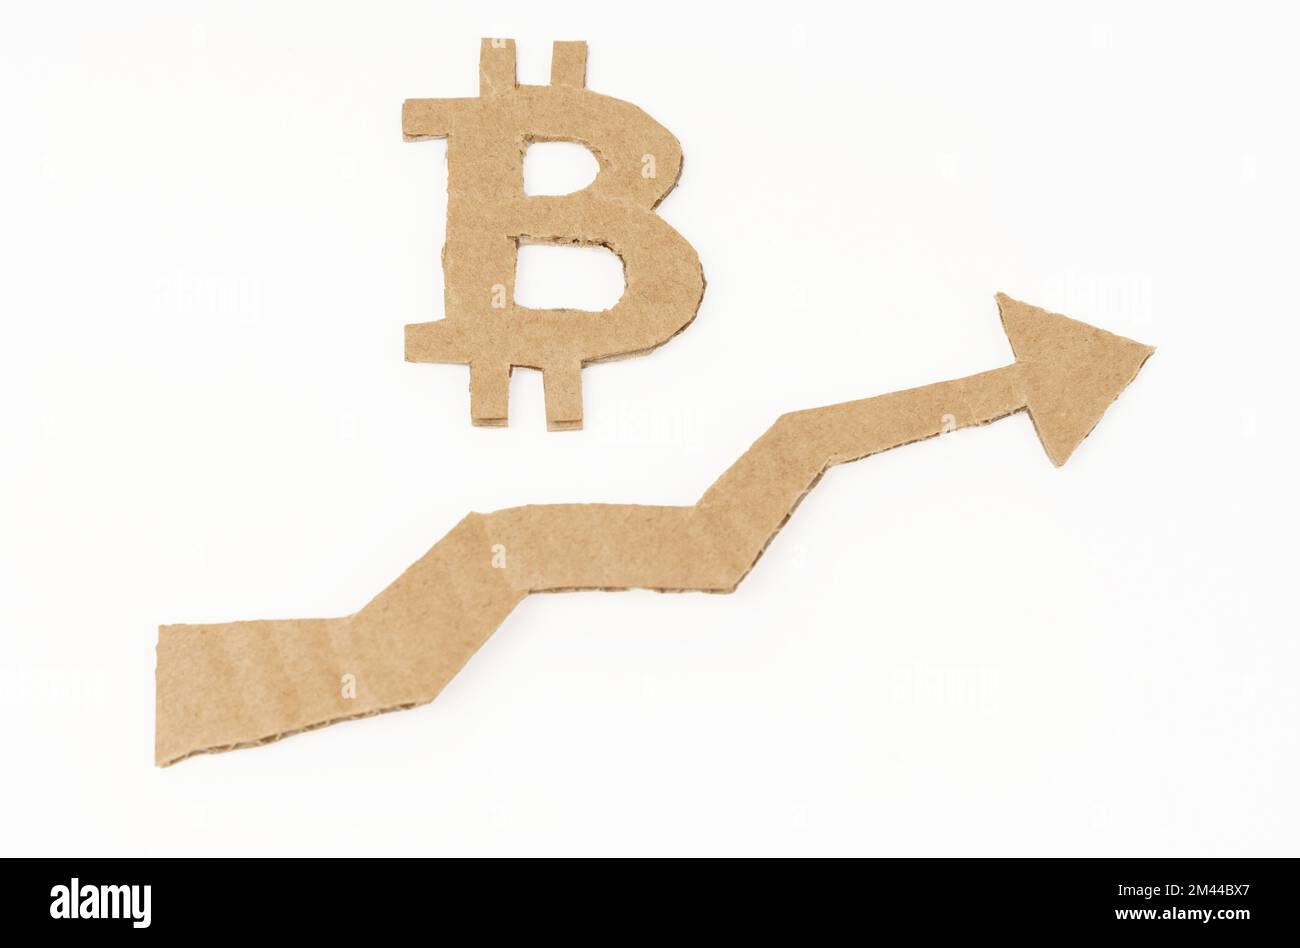 The concept of economic growth. On a white surface, a graph with an up arrow and a bitcoin symbol. Symbol, arrow and graph are made of cardboard Stock Photo